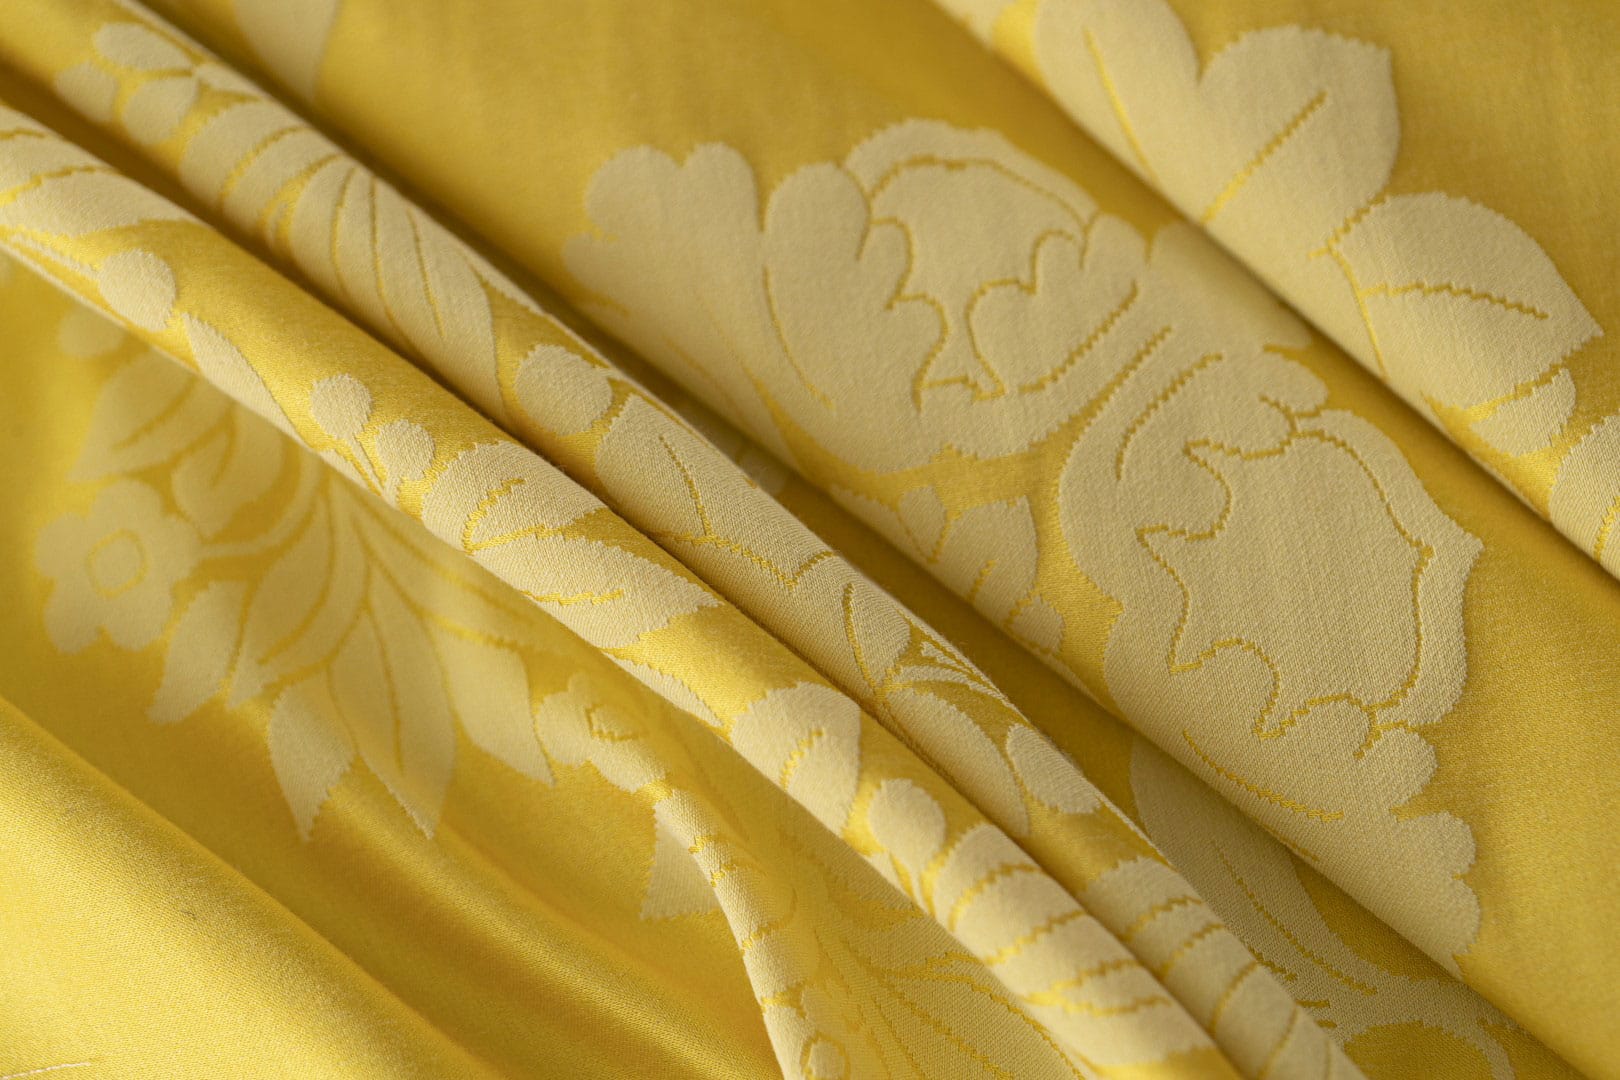 DRAGONFLY 002 Giallo home decoration fabric